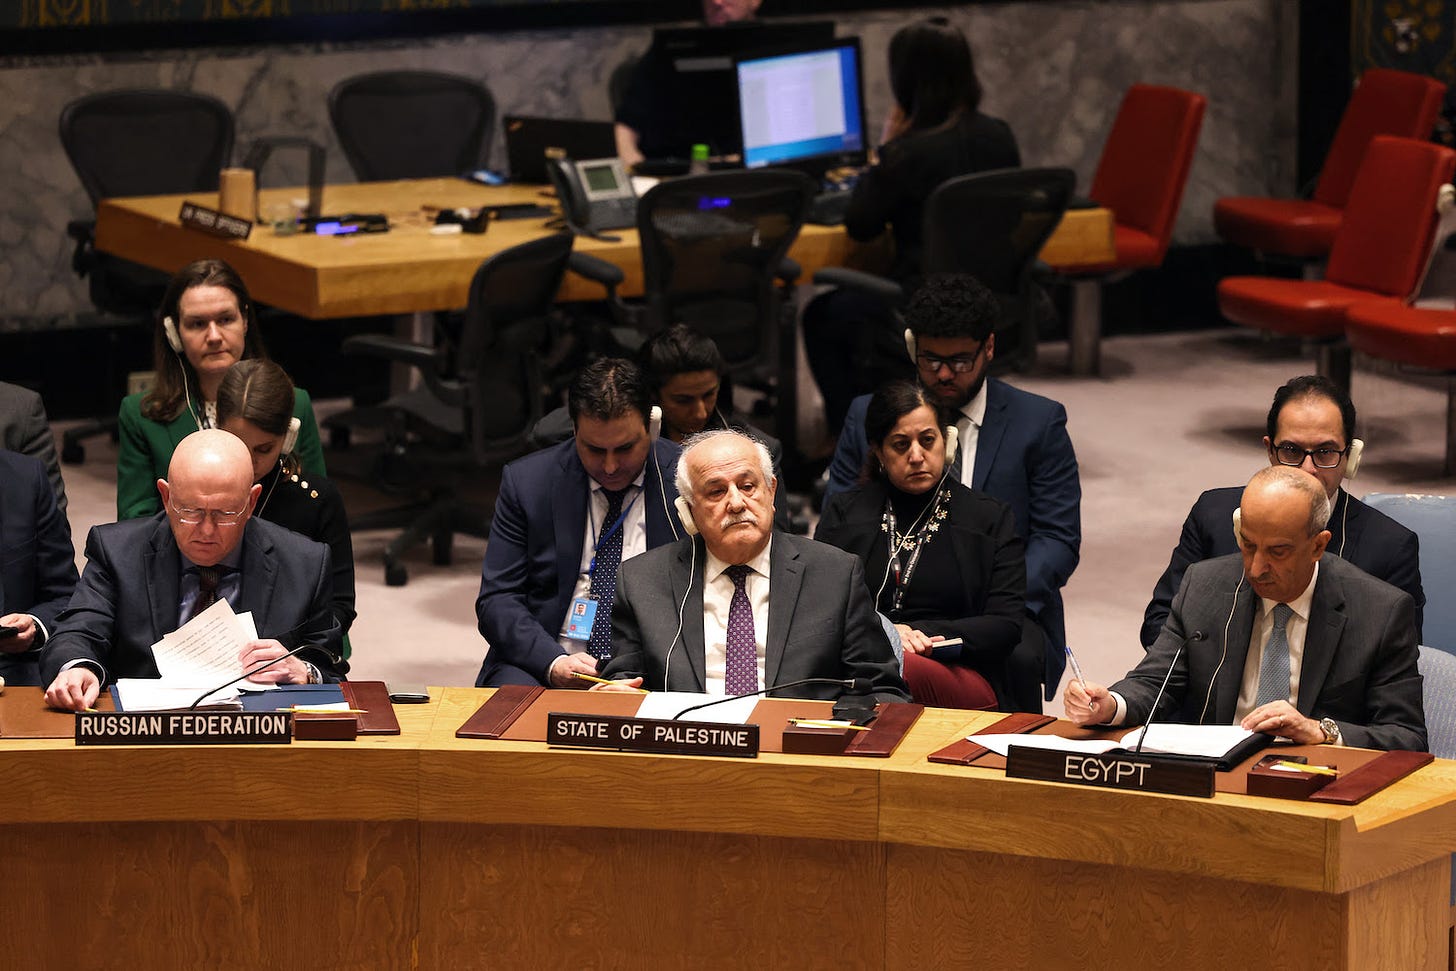 The Russian, Palestinian, and Egyptian representatives to the United Nations attend a Security Council meeting.